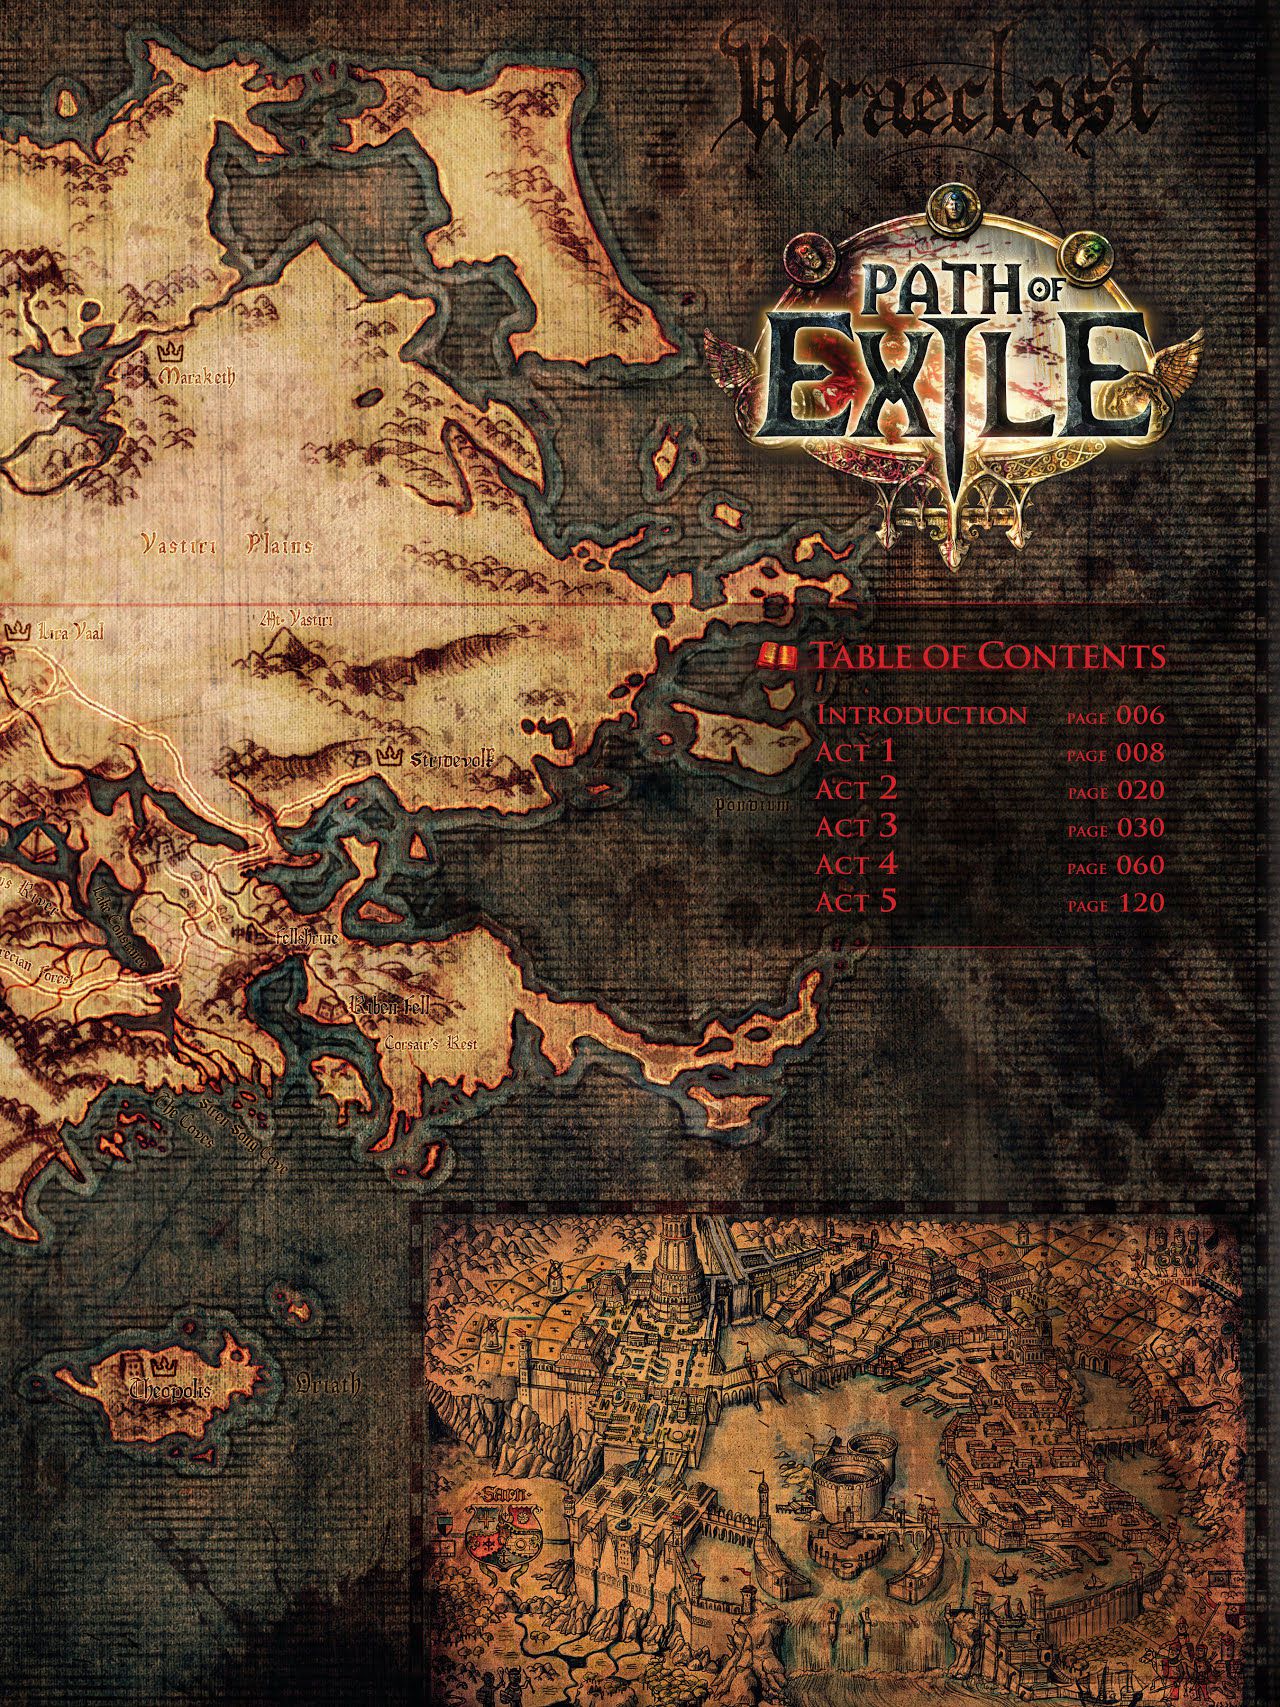 The Art of Path of Exile 5